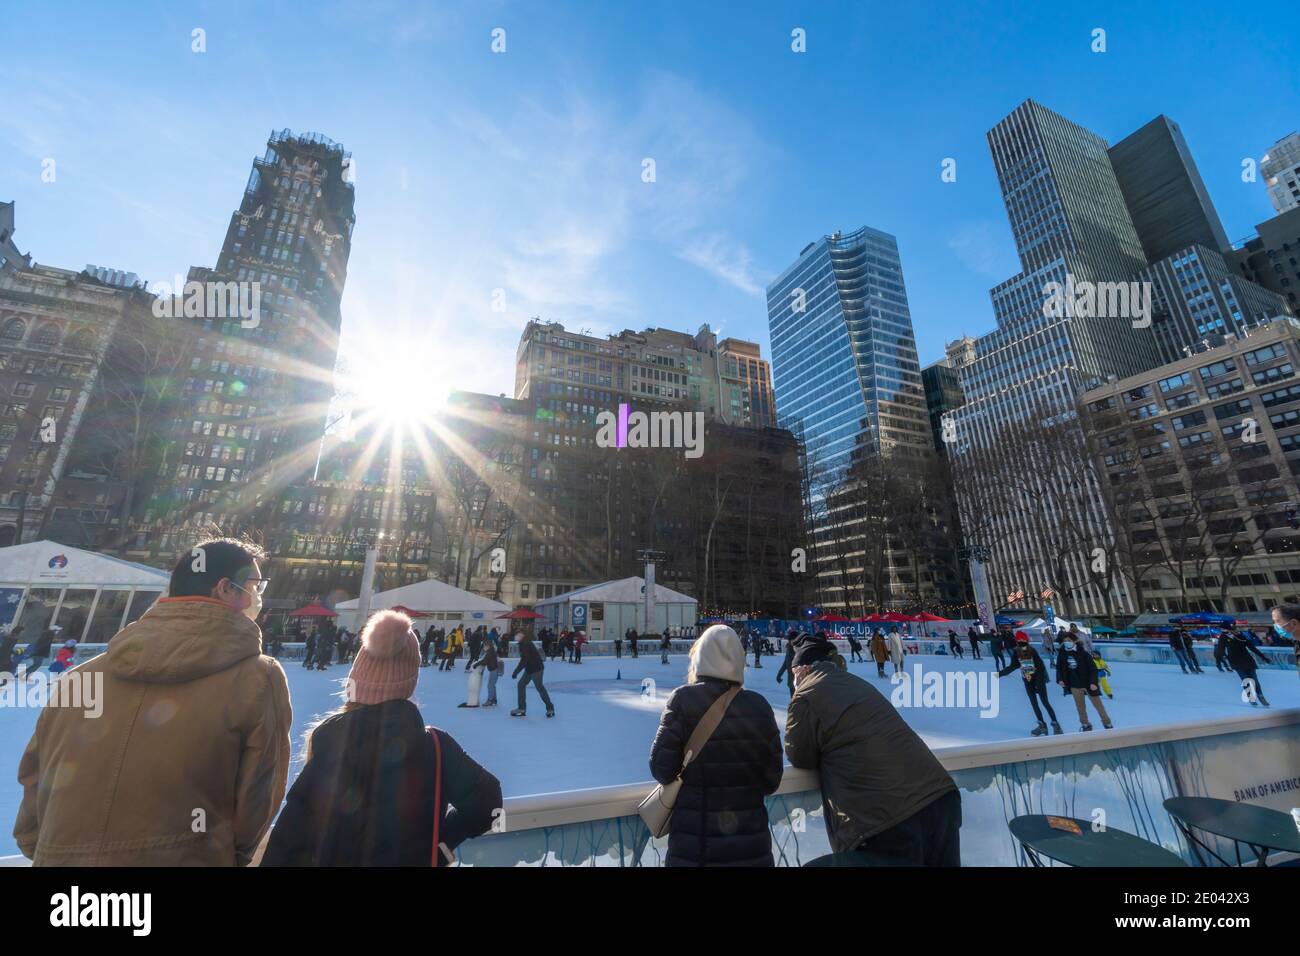 People enjoy Ice Skating at Bryant Park during the COVID-19 Pandemic. Stock Photo